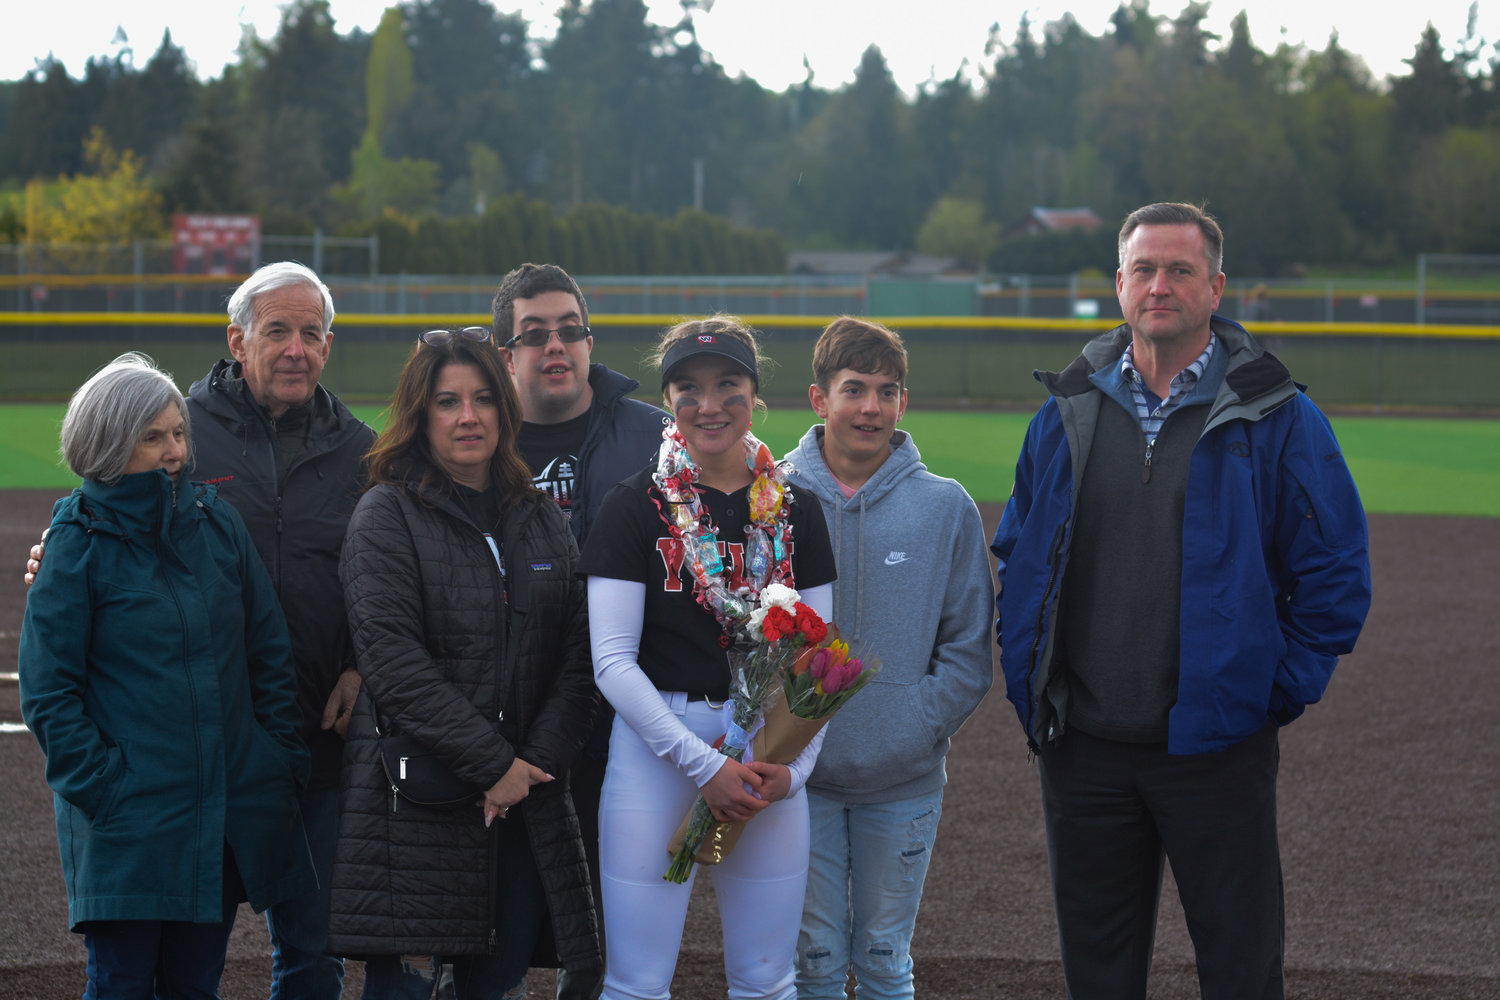 Senior second baseman Molly Embrey poses for a photo with her family following the senior night contest on May 9.